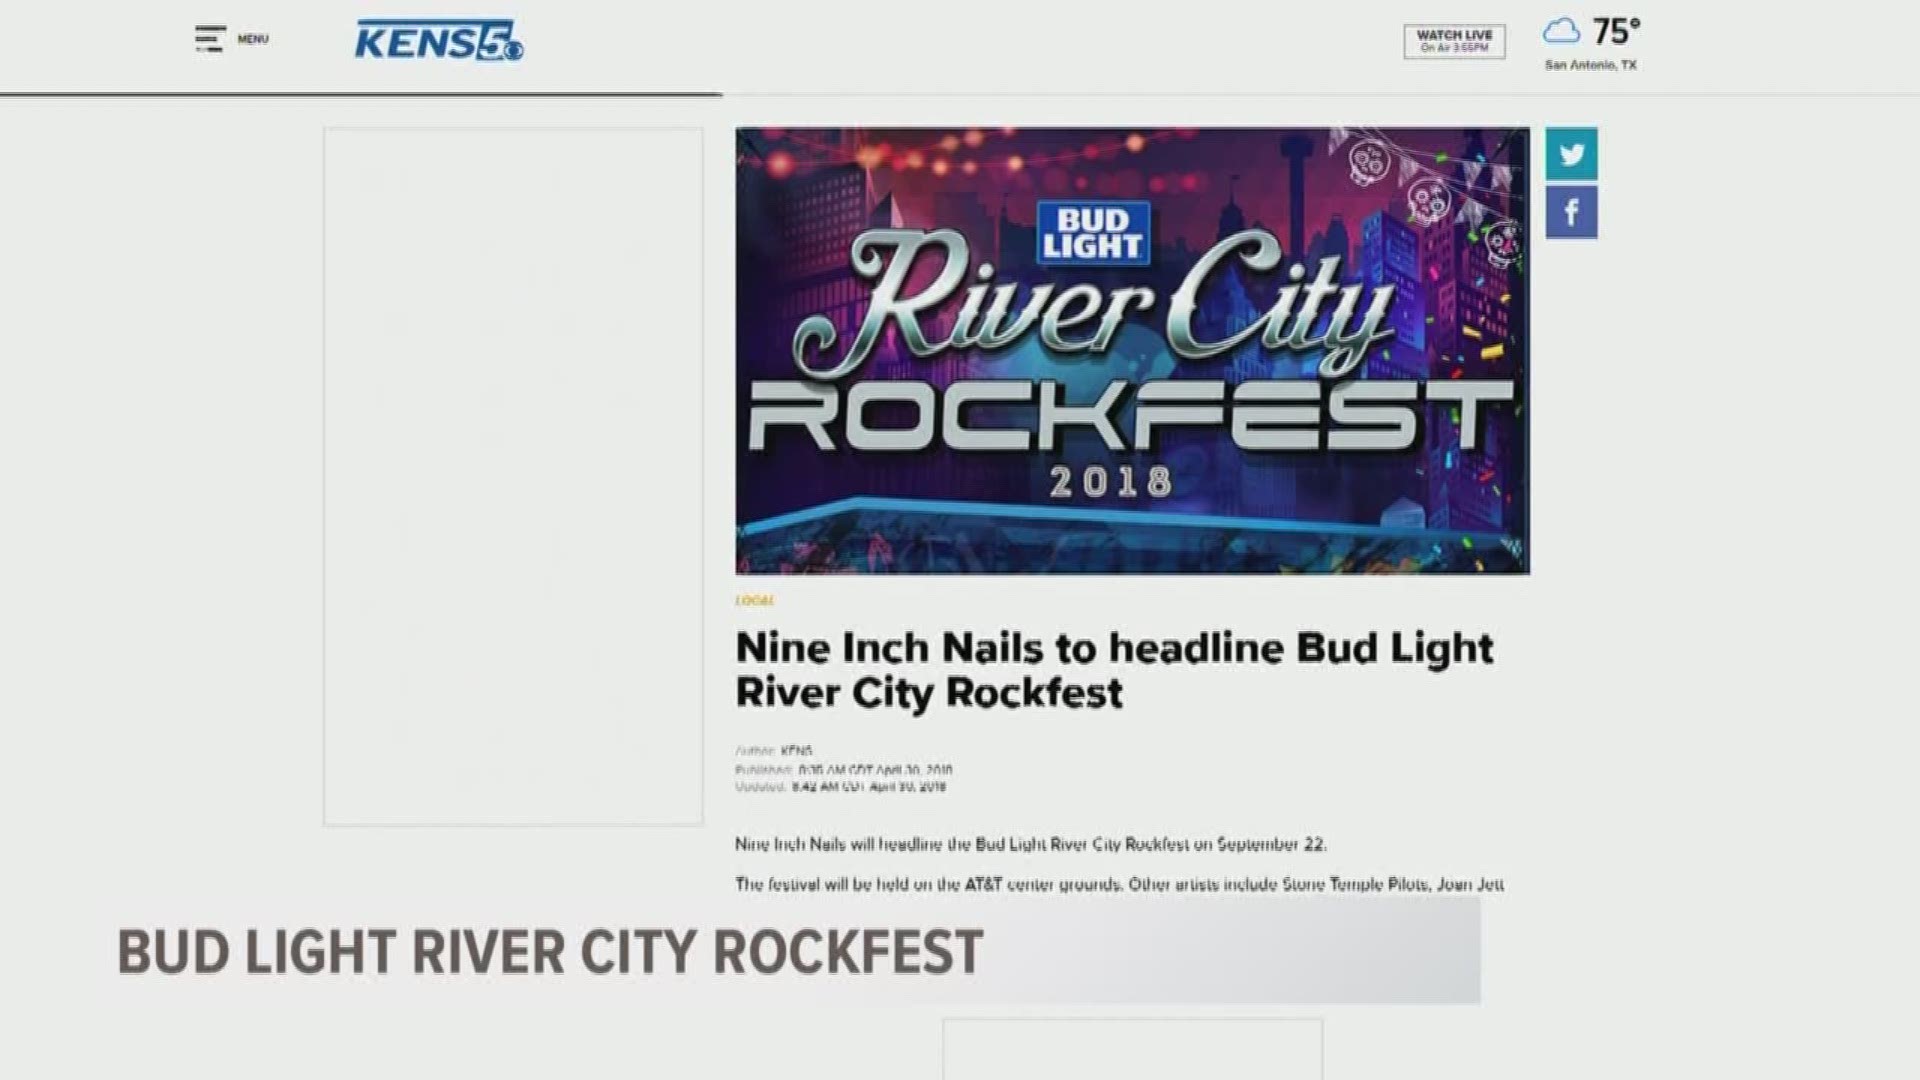 Nine Inch Nails will headline the River City Rockfest this September, along with other big names in rock and roll.